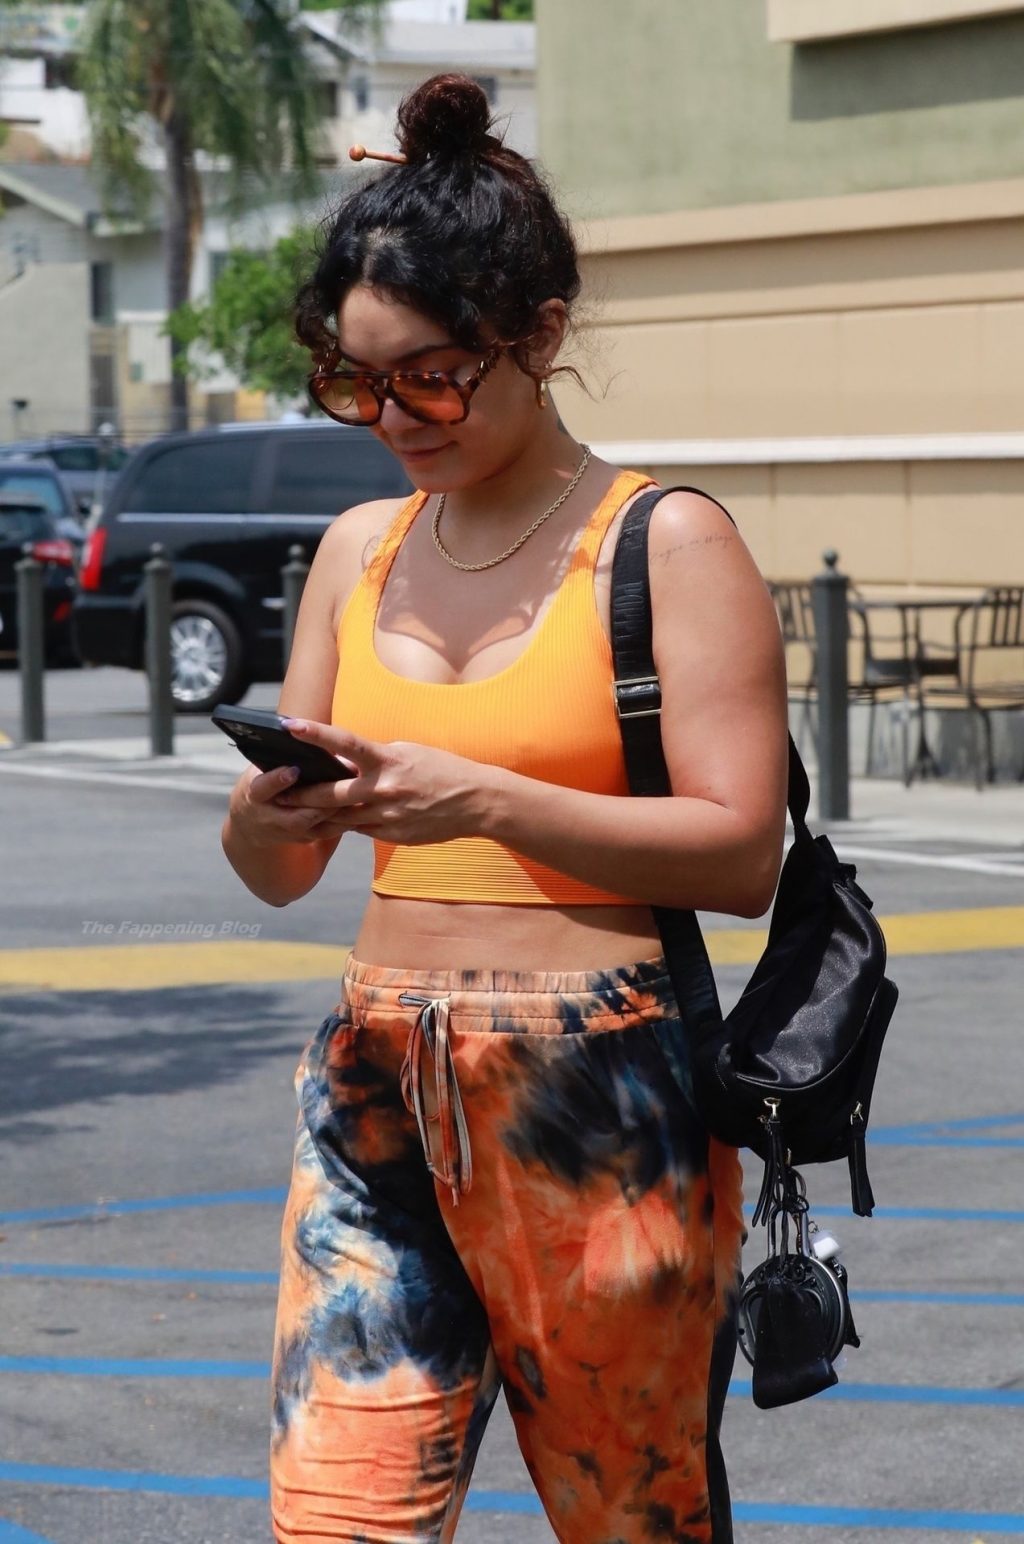 Vanessa Hudgens Takes Her Gym Fashion to Another Level (64 Photos)